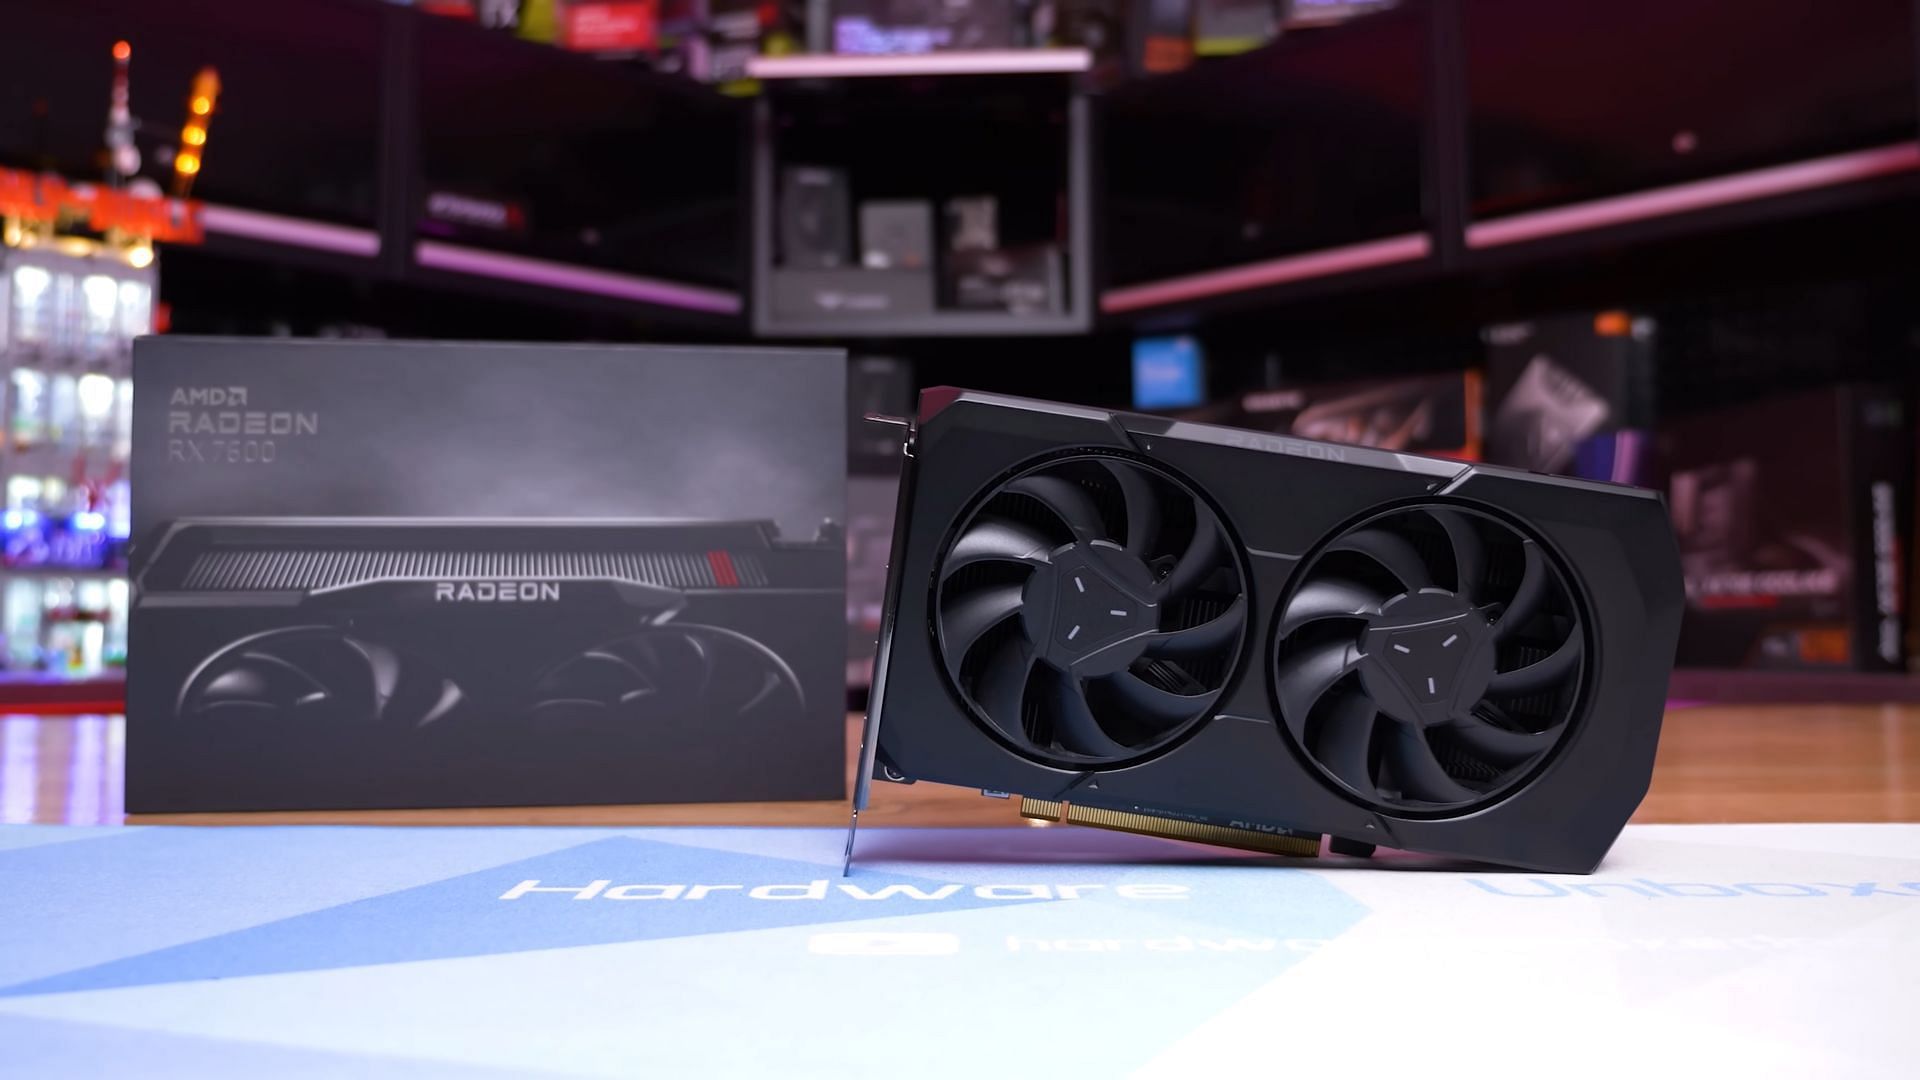 The Radeon 7600 with its box (Image via Hardware Unboxed/YouTube)